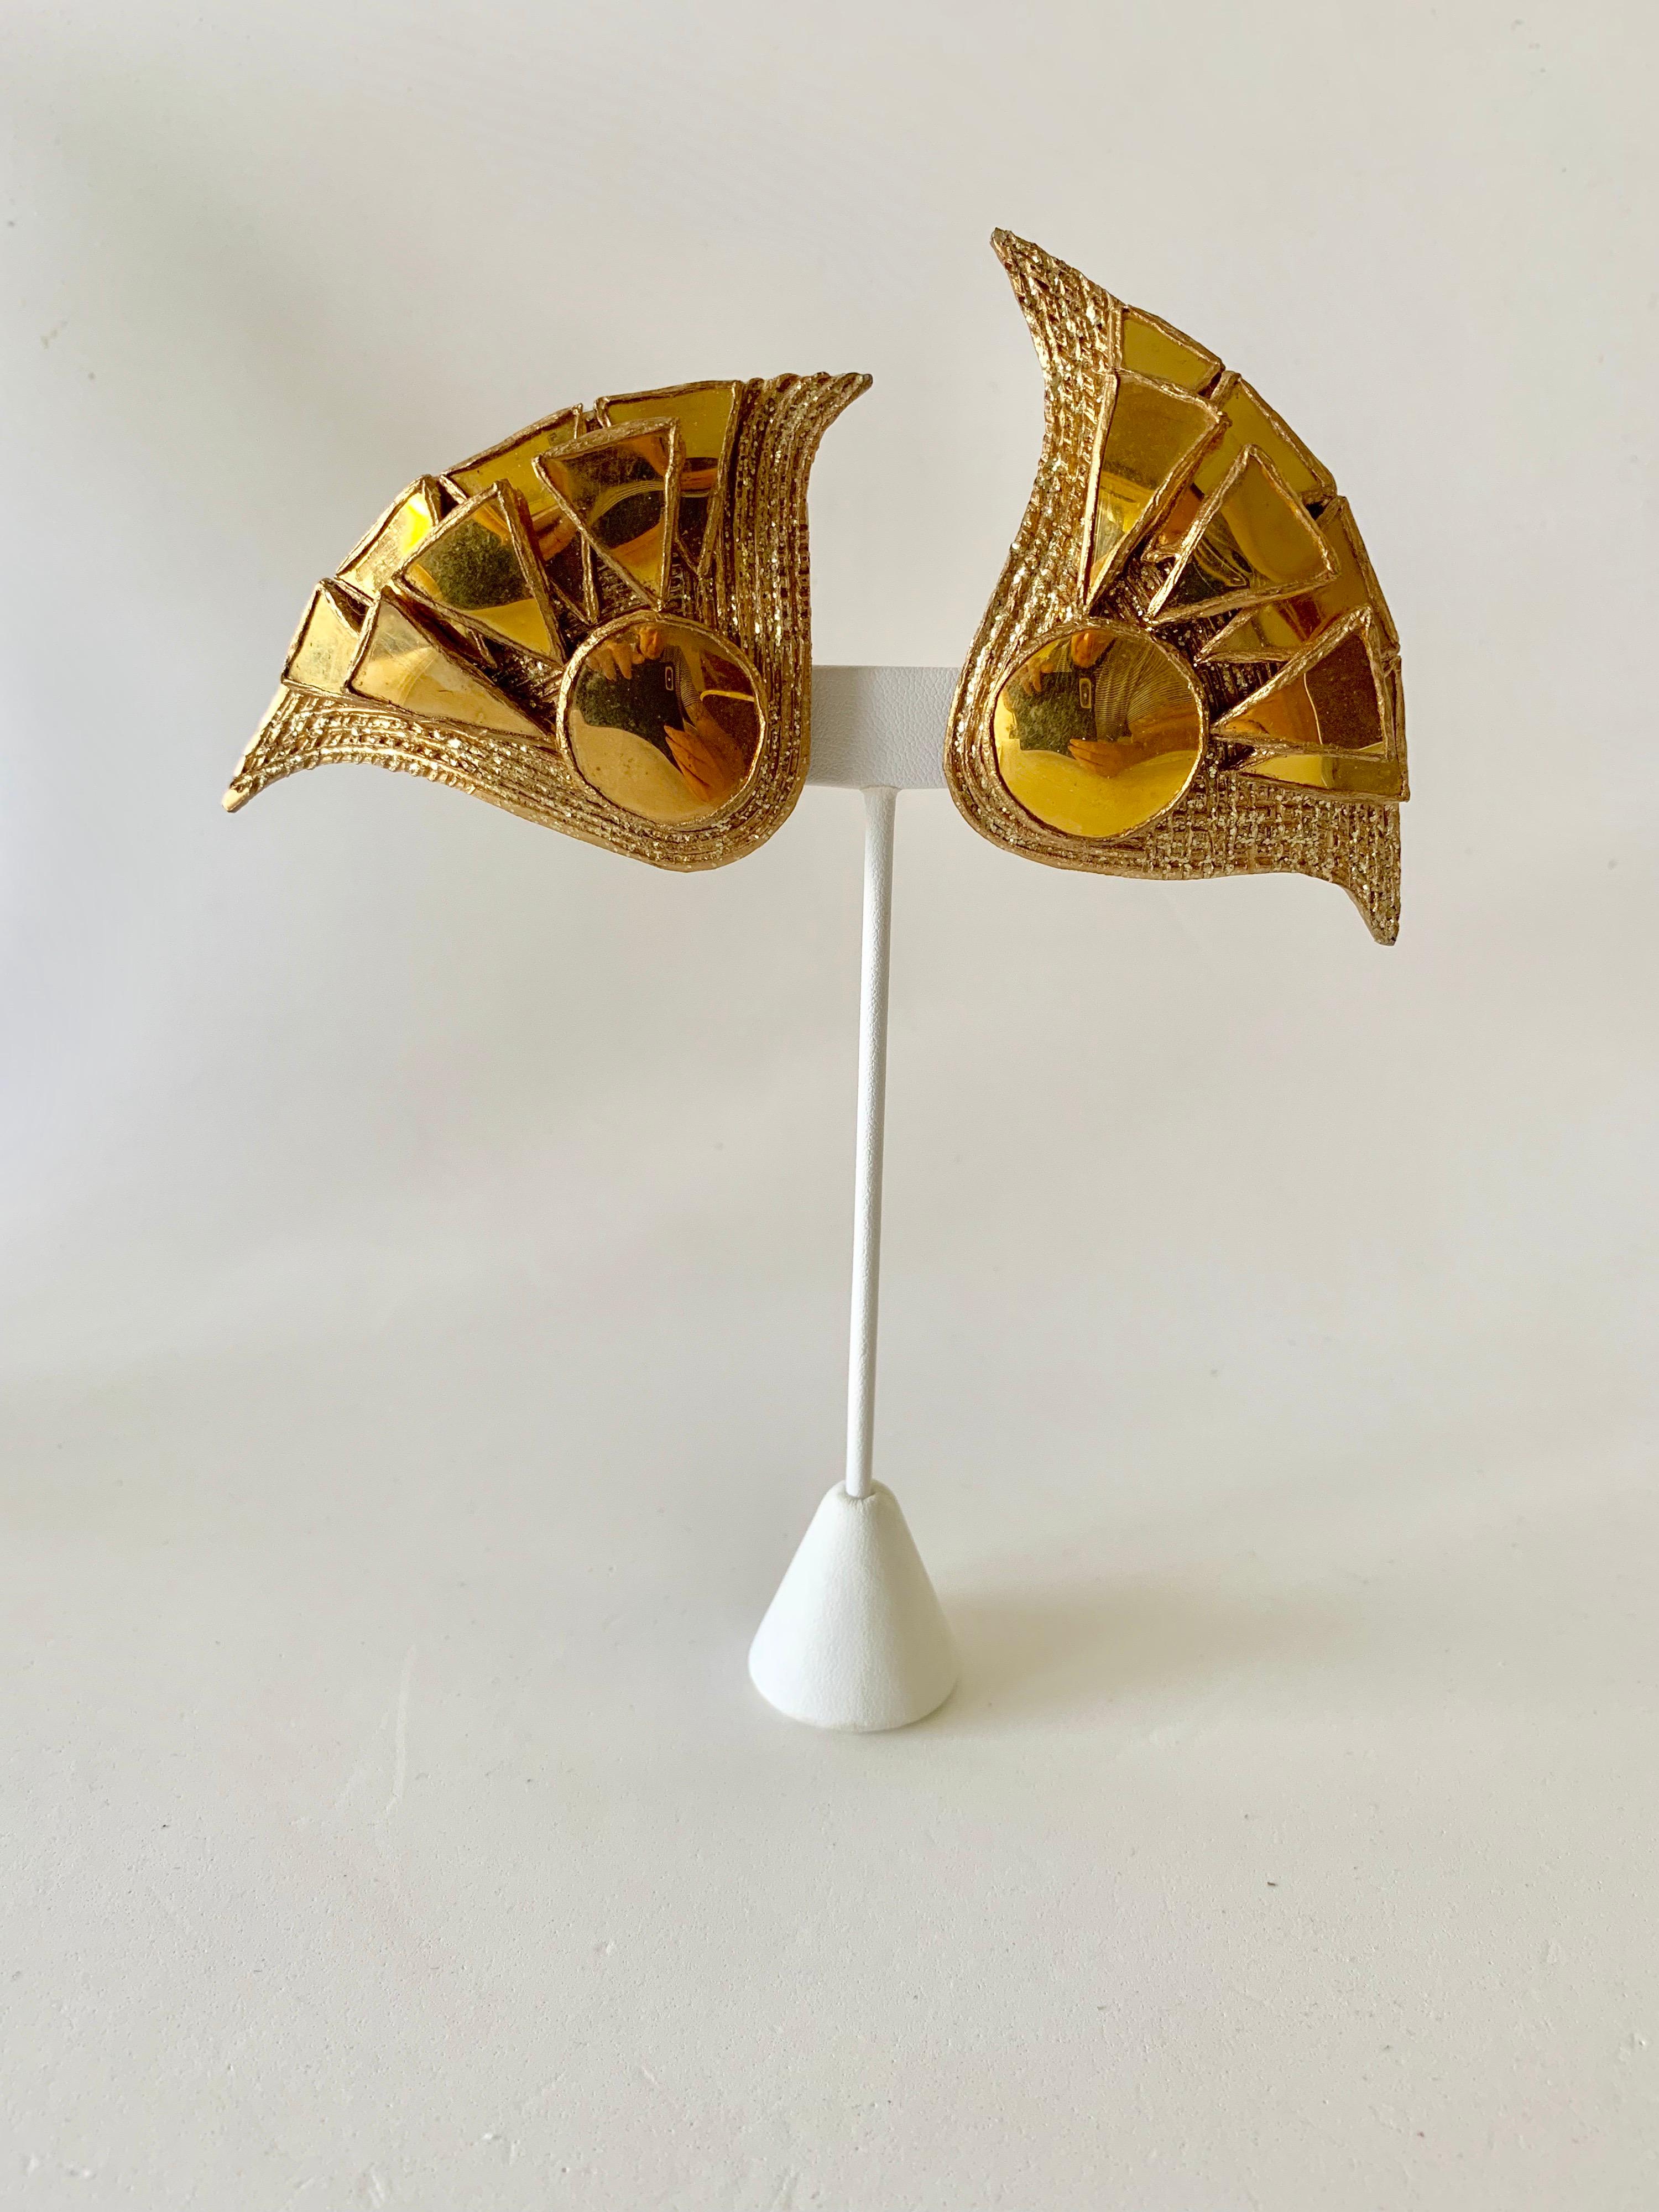 Chic and edgy 1970s - 1980's talosel resin artisanal statement clip-on earrings by Irina Jarworska, Paris. Rare gold resin talosel earrings with gold-encrusted tinted mirrors. Irina was a student who attended Line Vautrin's school in Paris where she